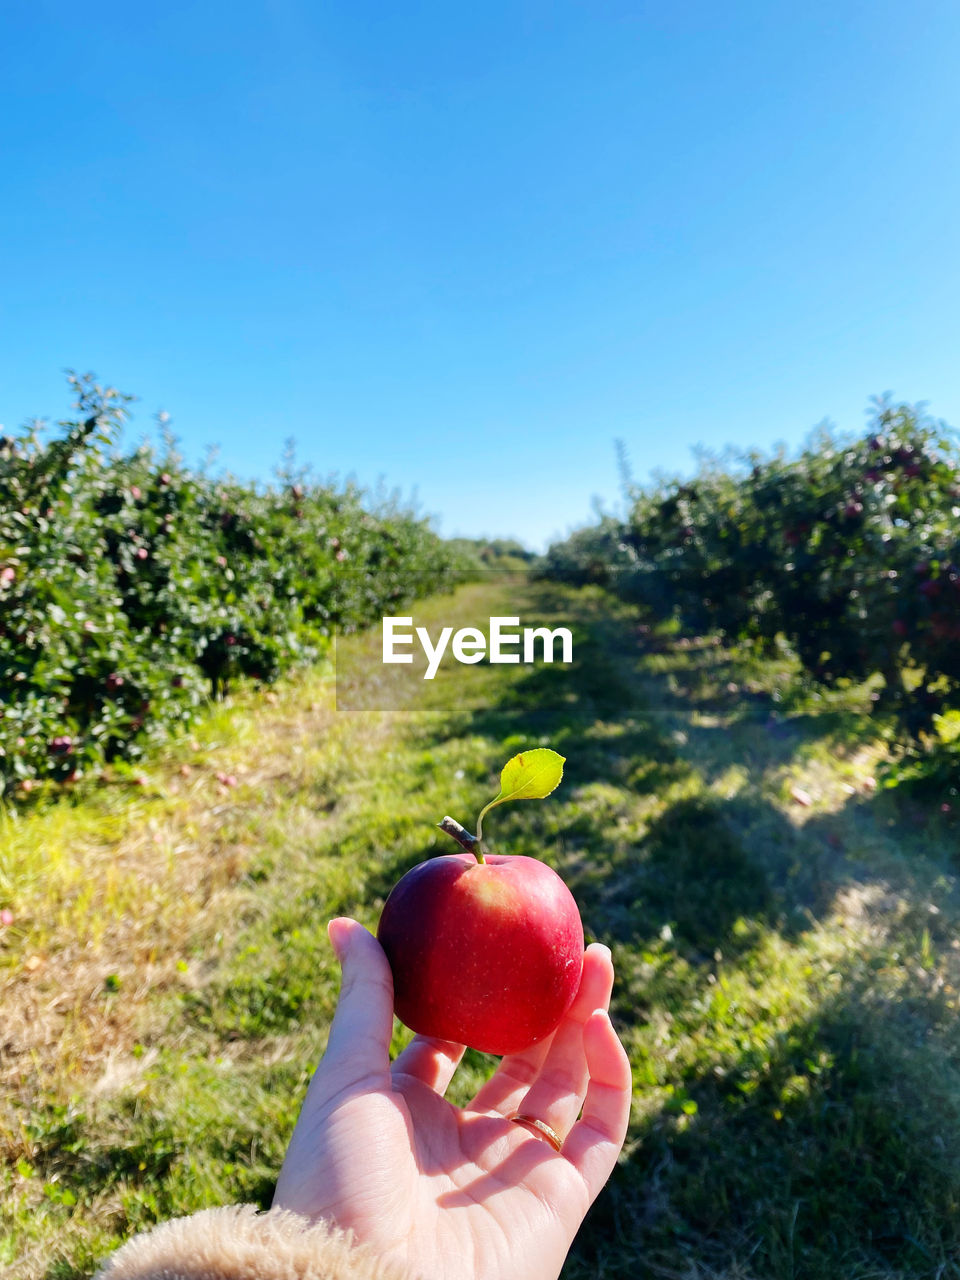 First person view of a ripe, red apple, leading into an apple orchard in fall.